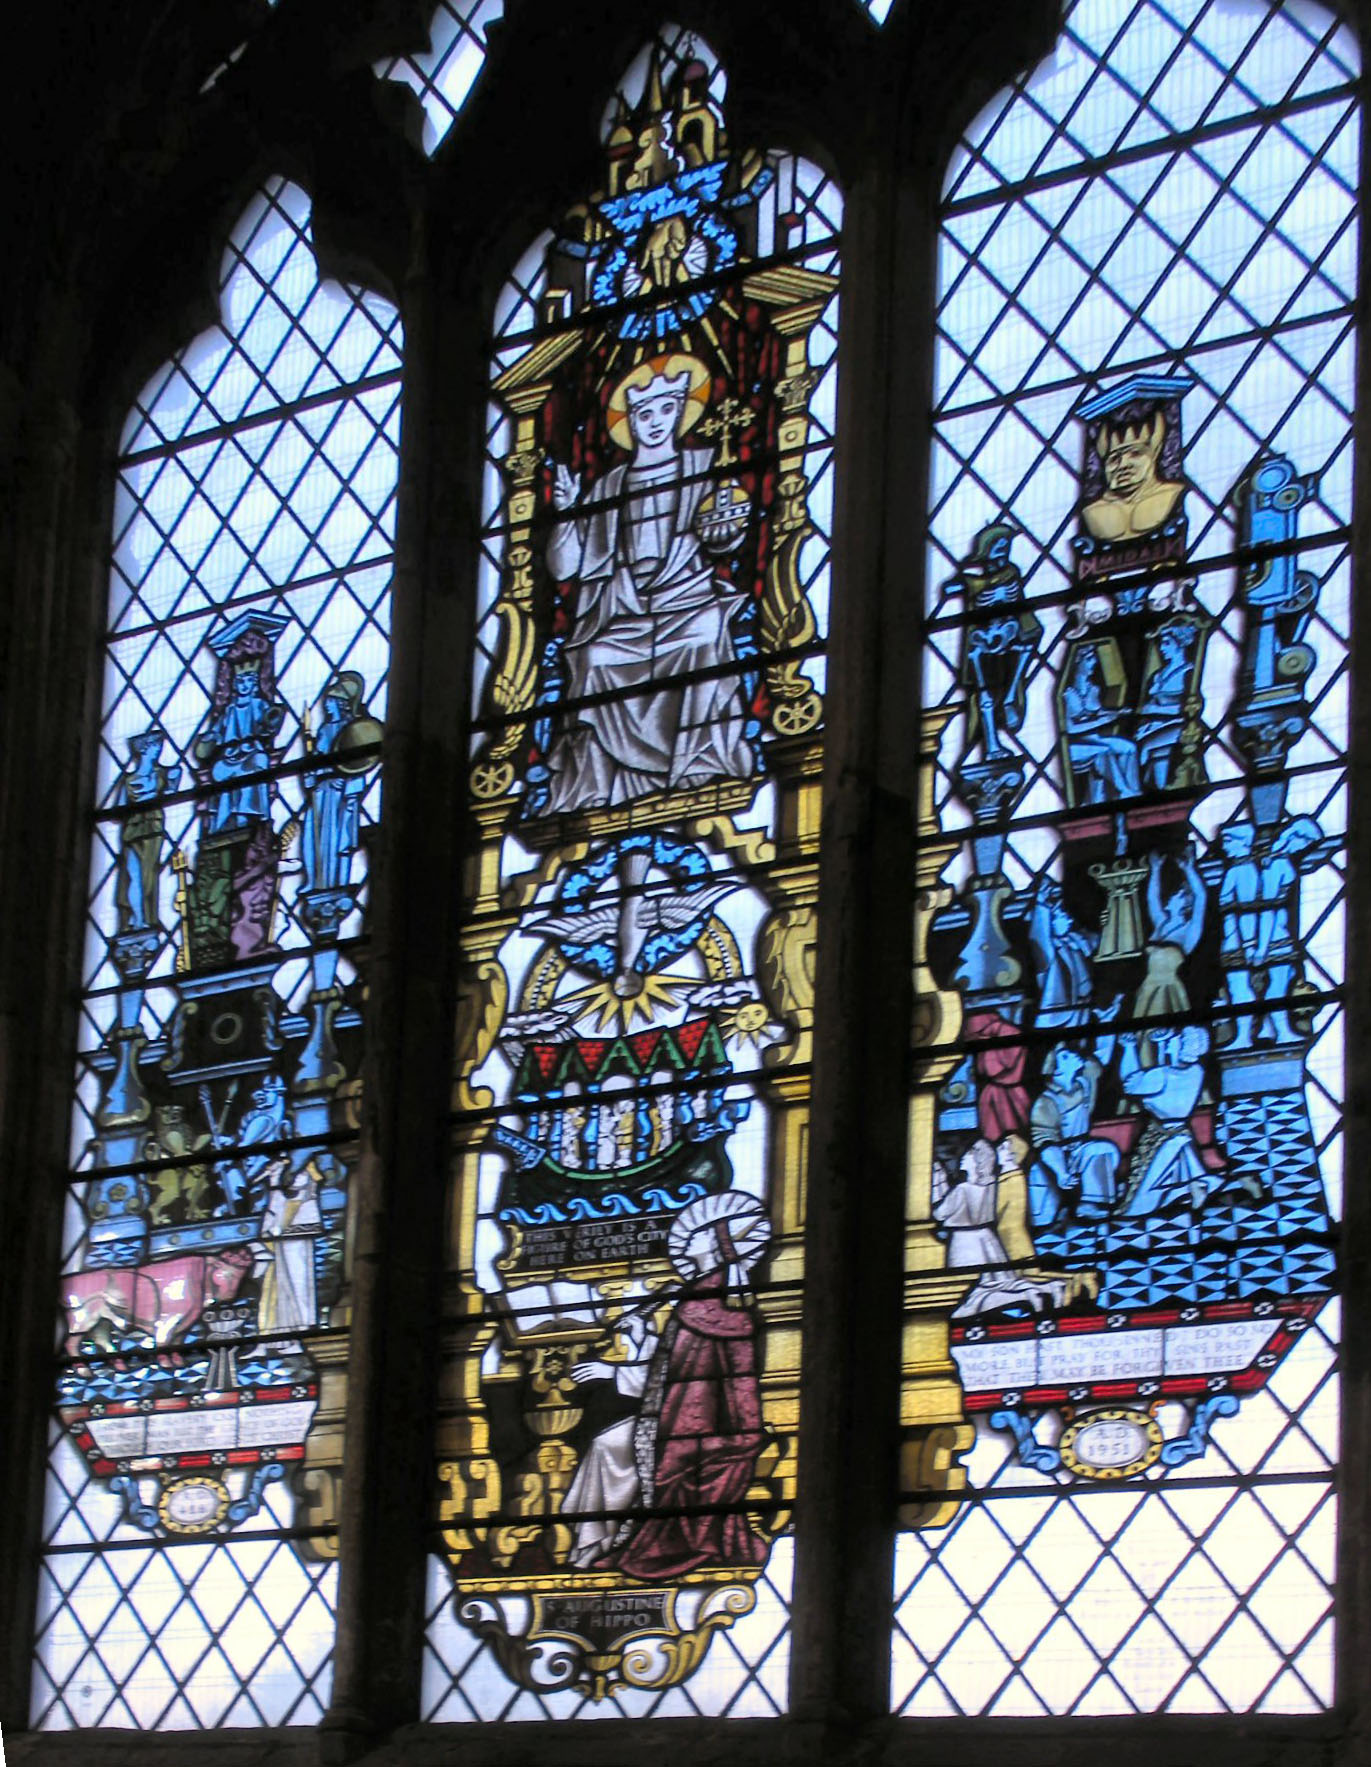 The 1951 window by Harry Stammers